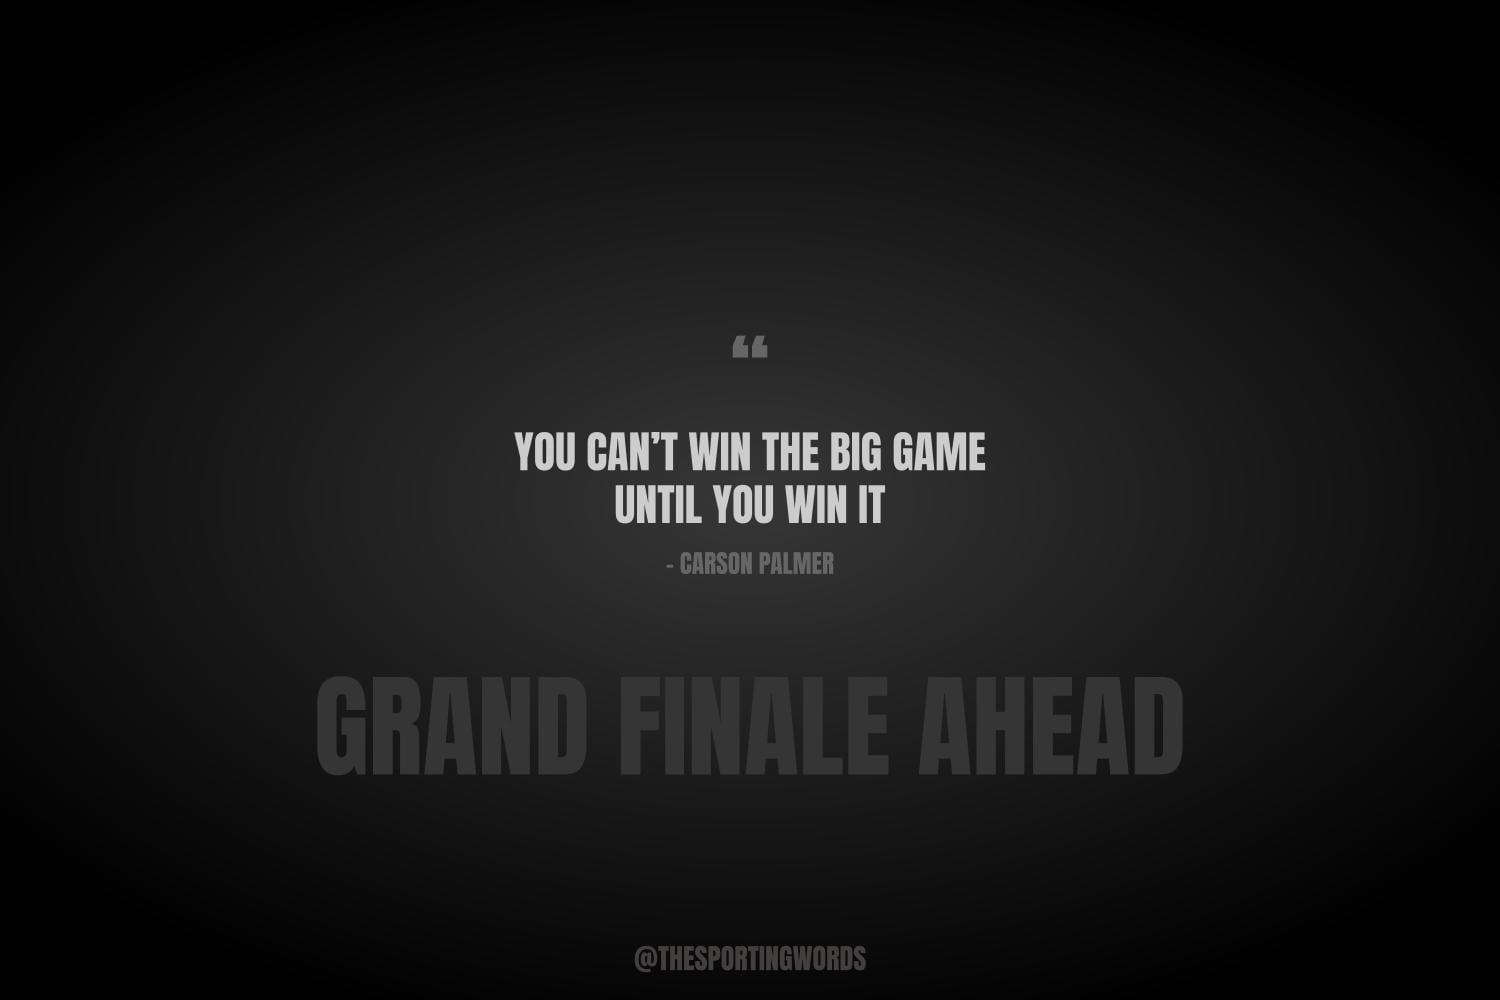 Let's Start the Game Quotes - Motivation and Love